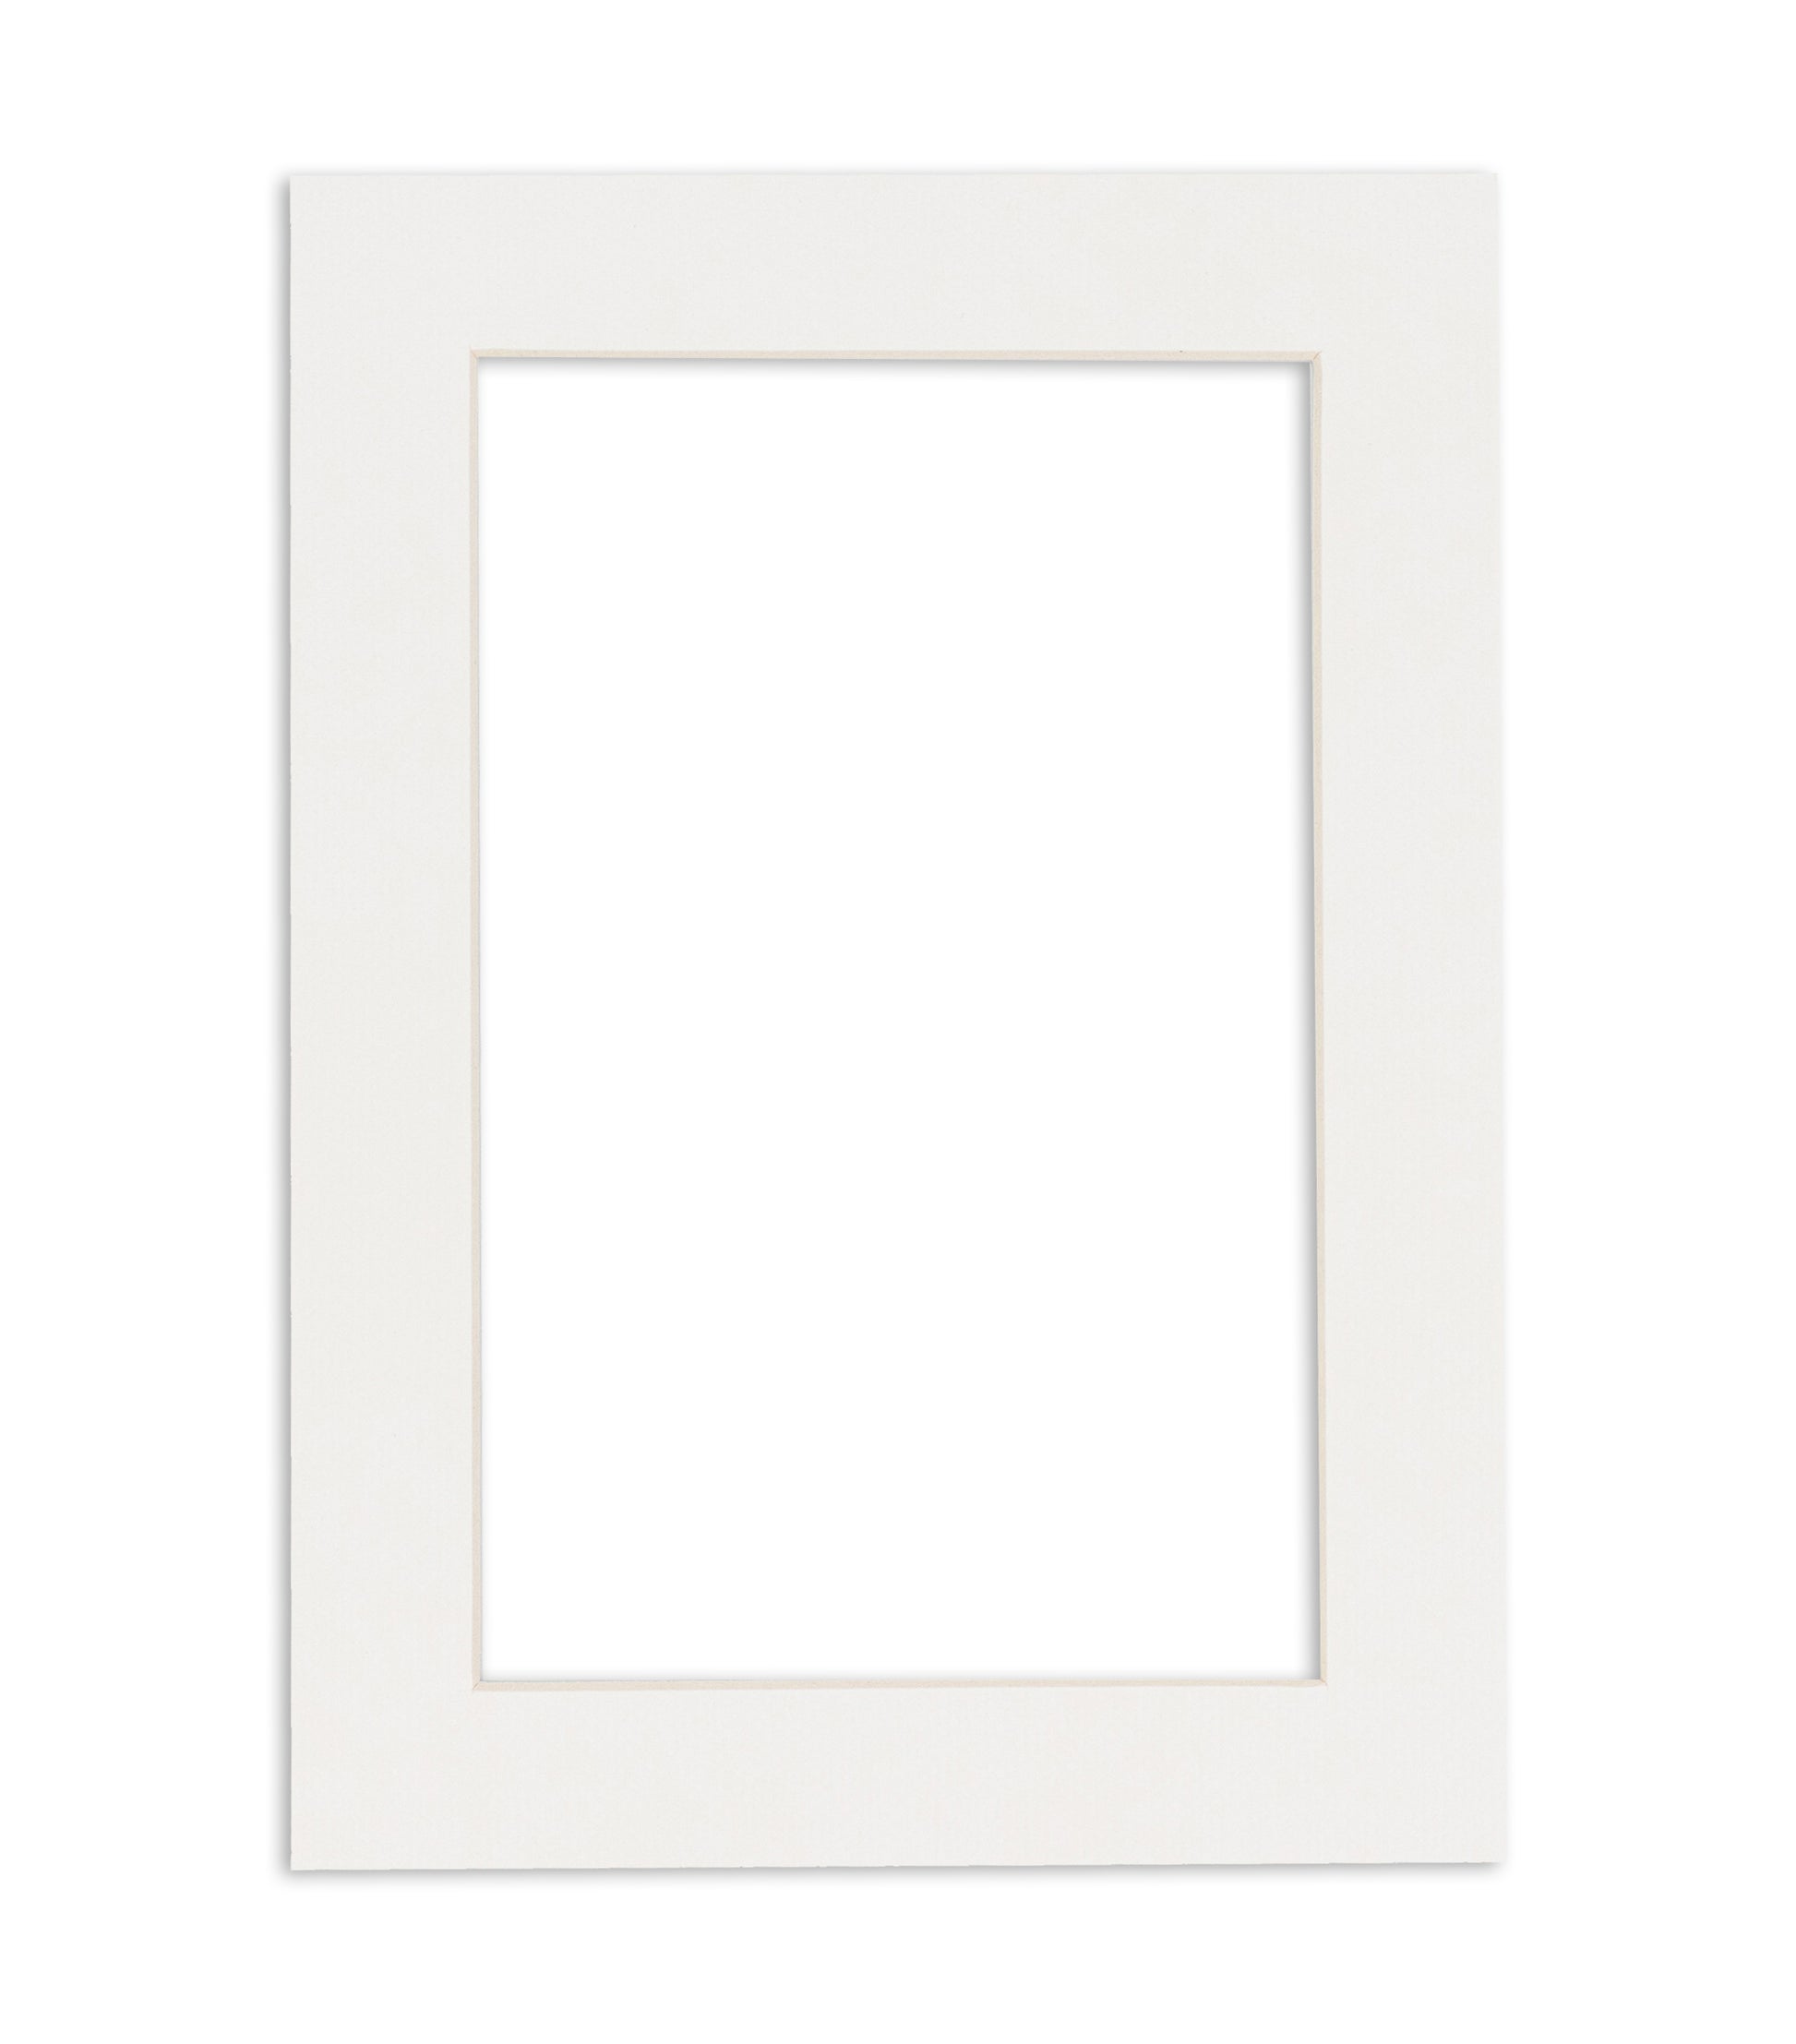 5x7 Mat for 8x10 Frame - Precut Mat Board Acid-Free White 5x7 Photo Matte  Made to Fit a 8x10 Review 